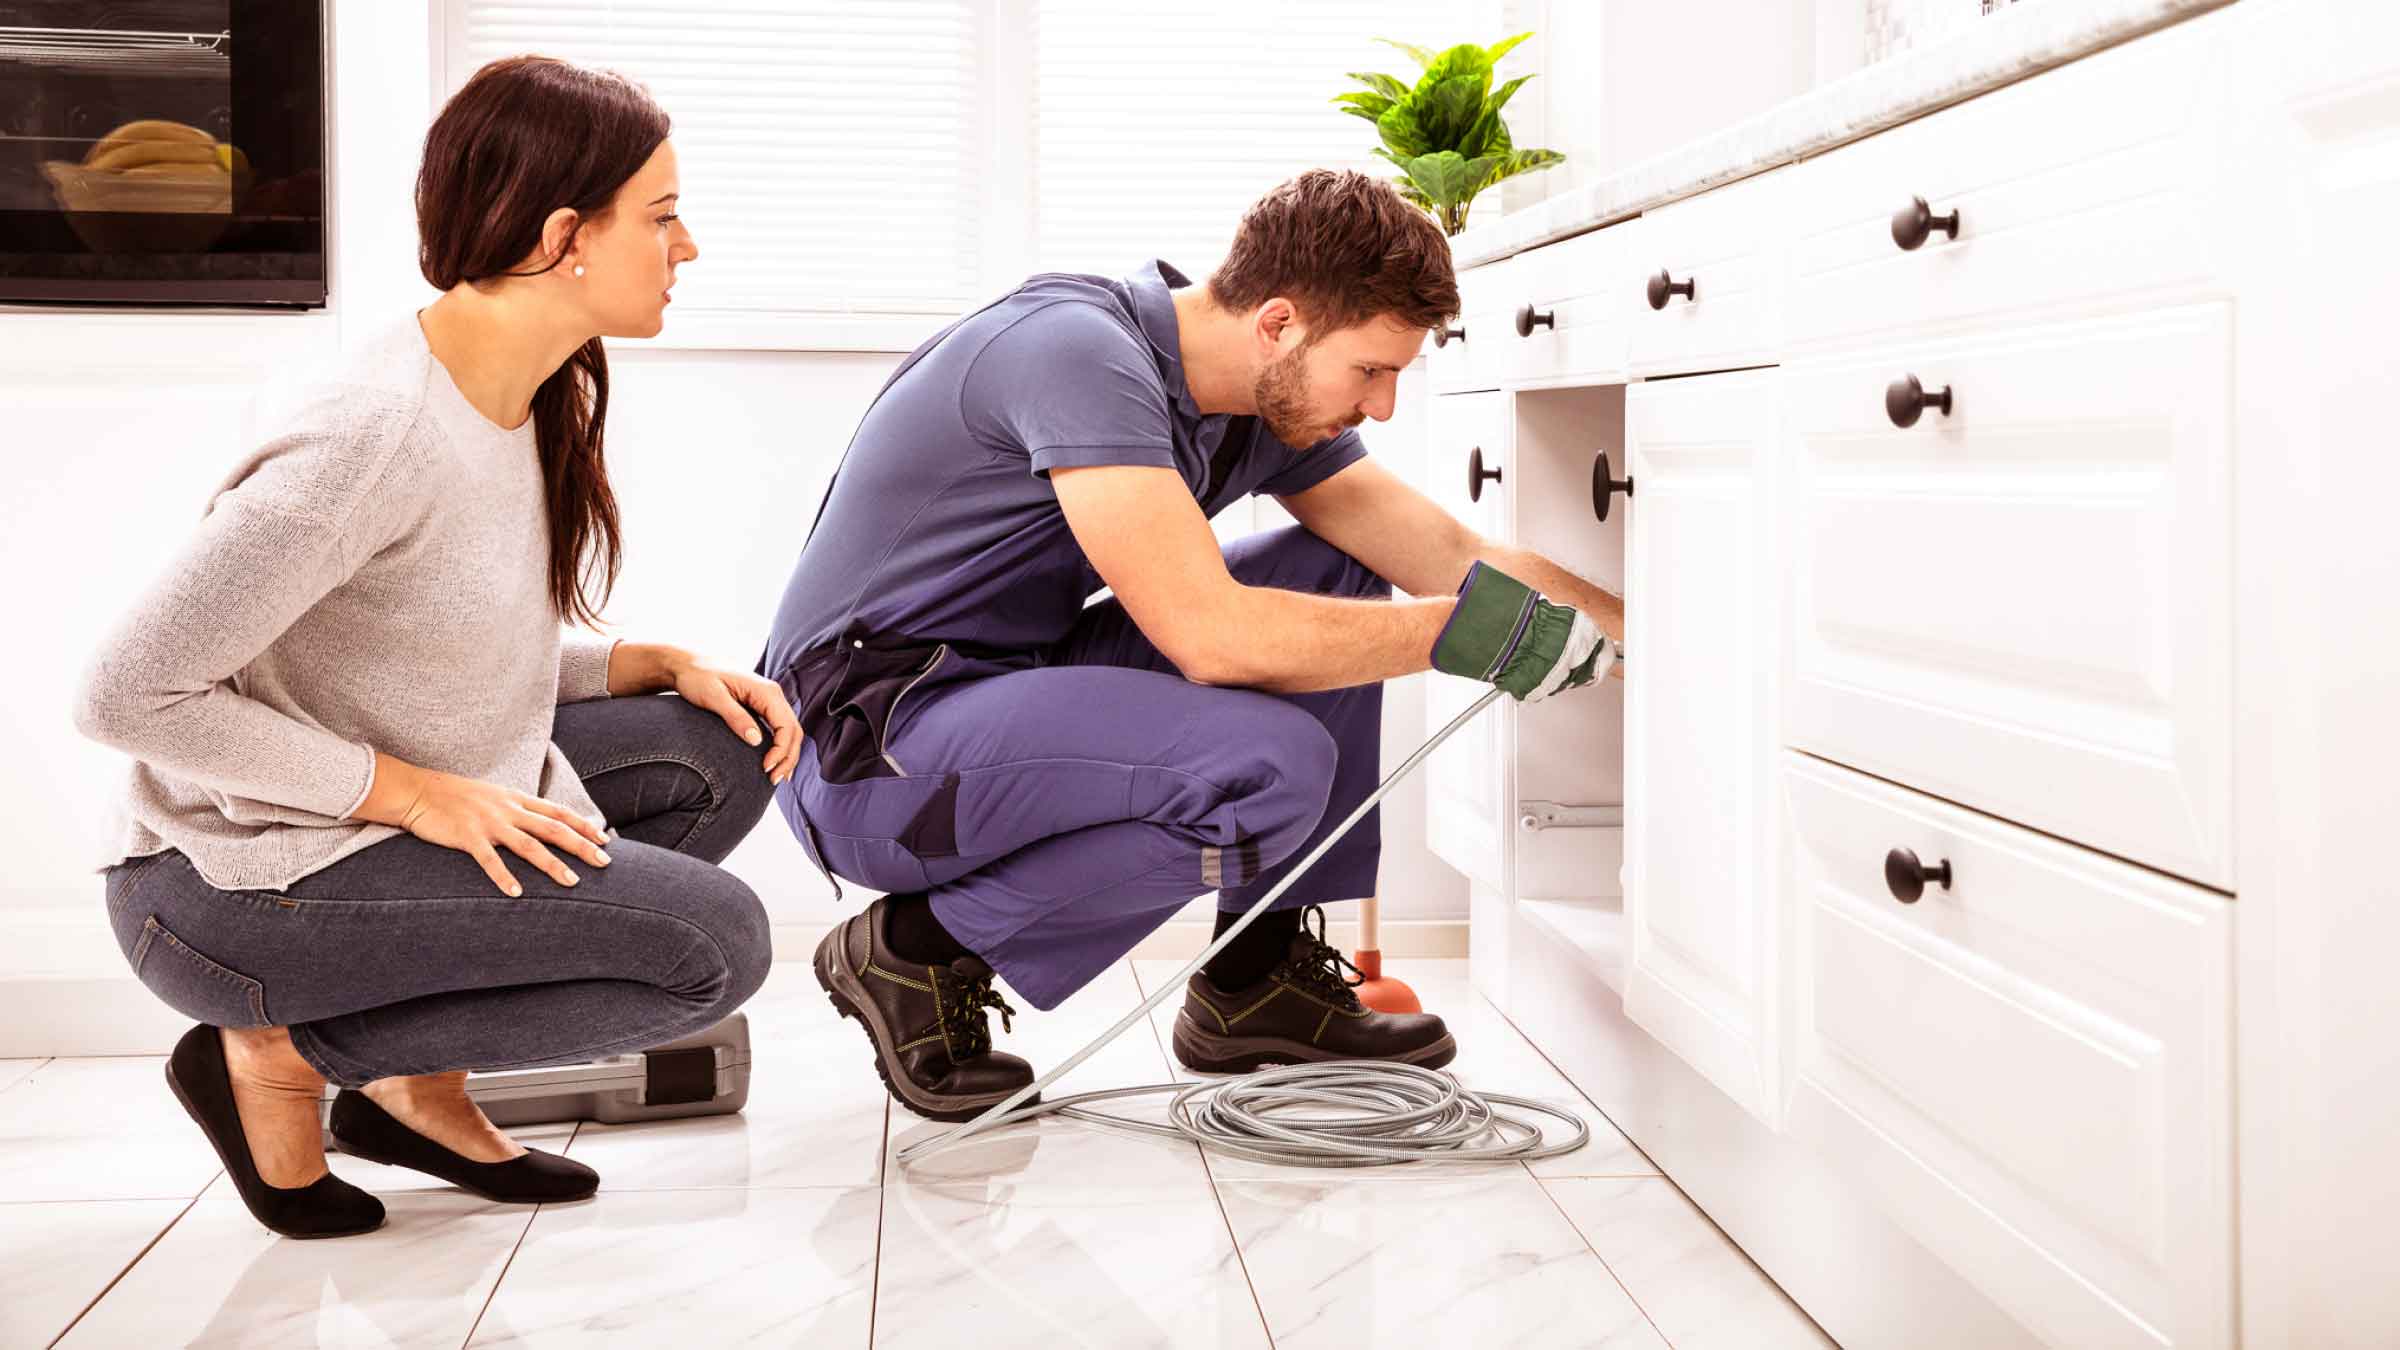 Woman and tradie kneel in front of kitchen cupboard inspecting plumbing.